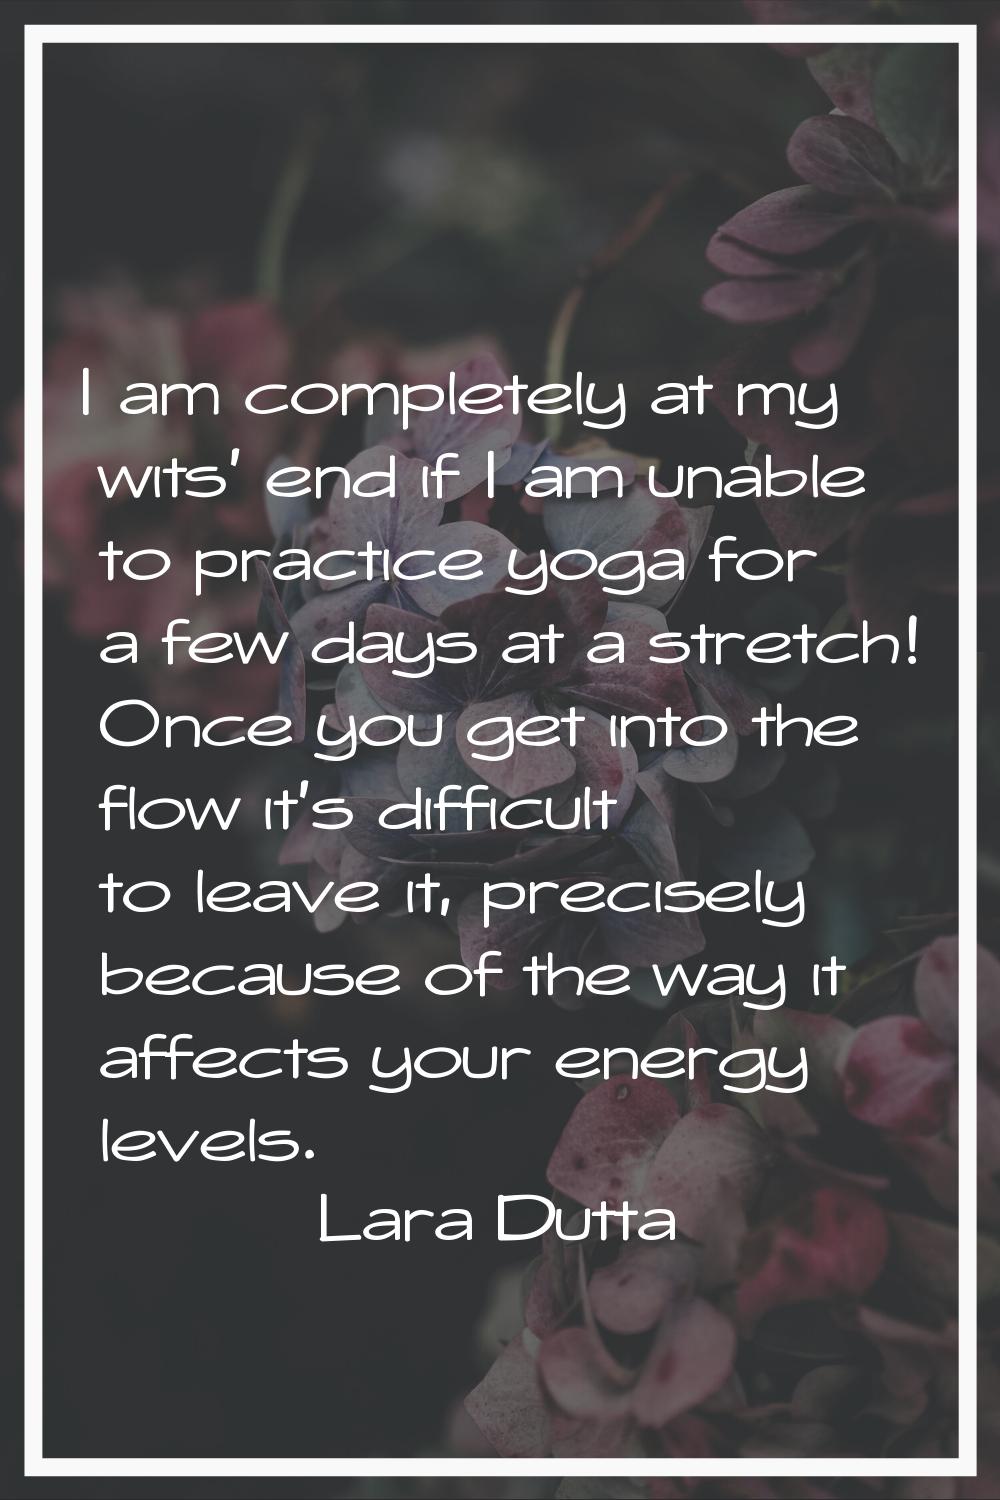 I am completely at my wits' end if I am unable to practice yoga for a few days at a stretch! Once y